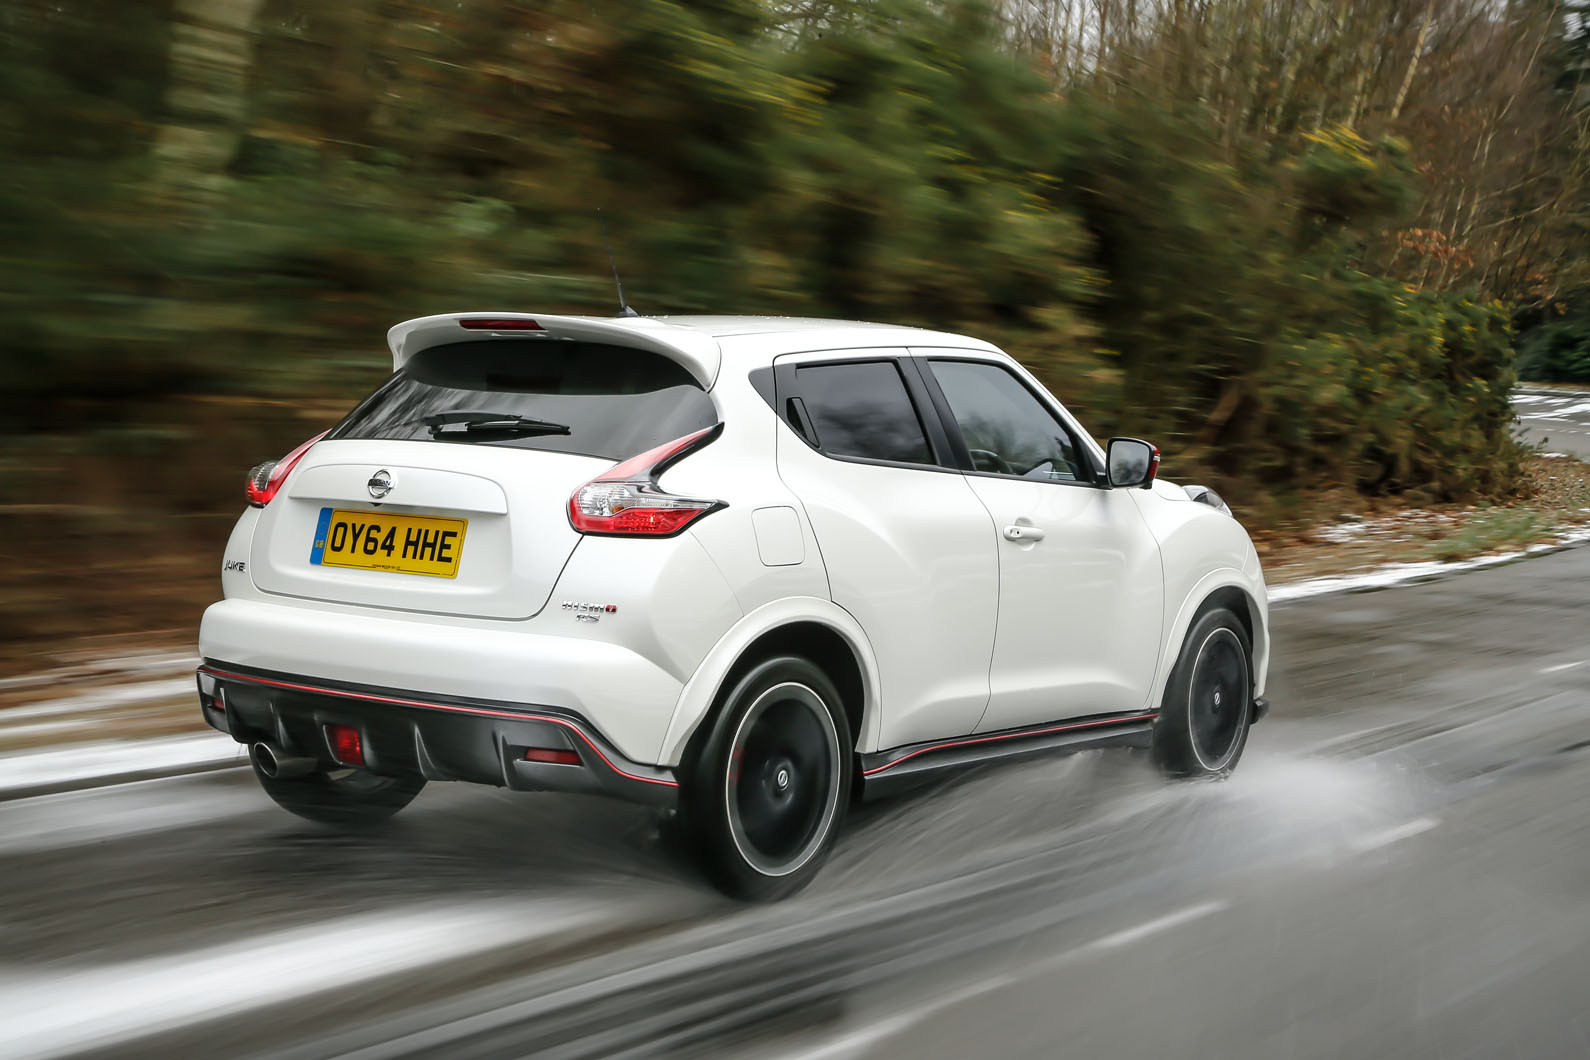 The Nissan Juke Nismo RS accounts for 3% of Jukes built in Europe